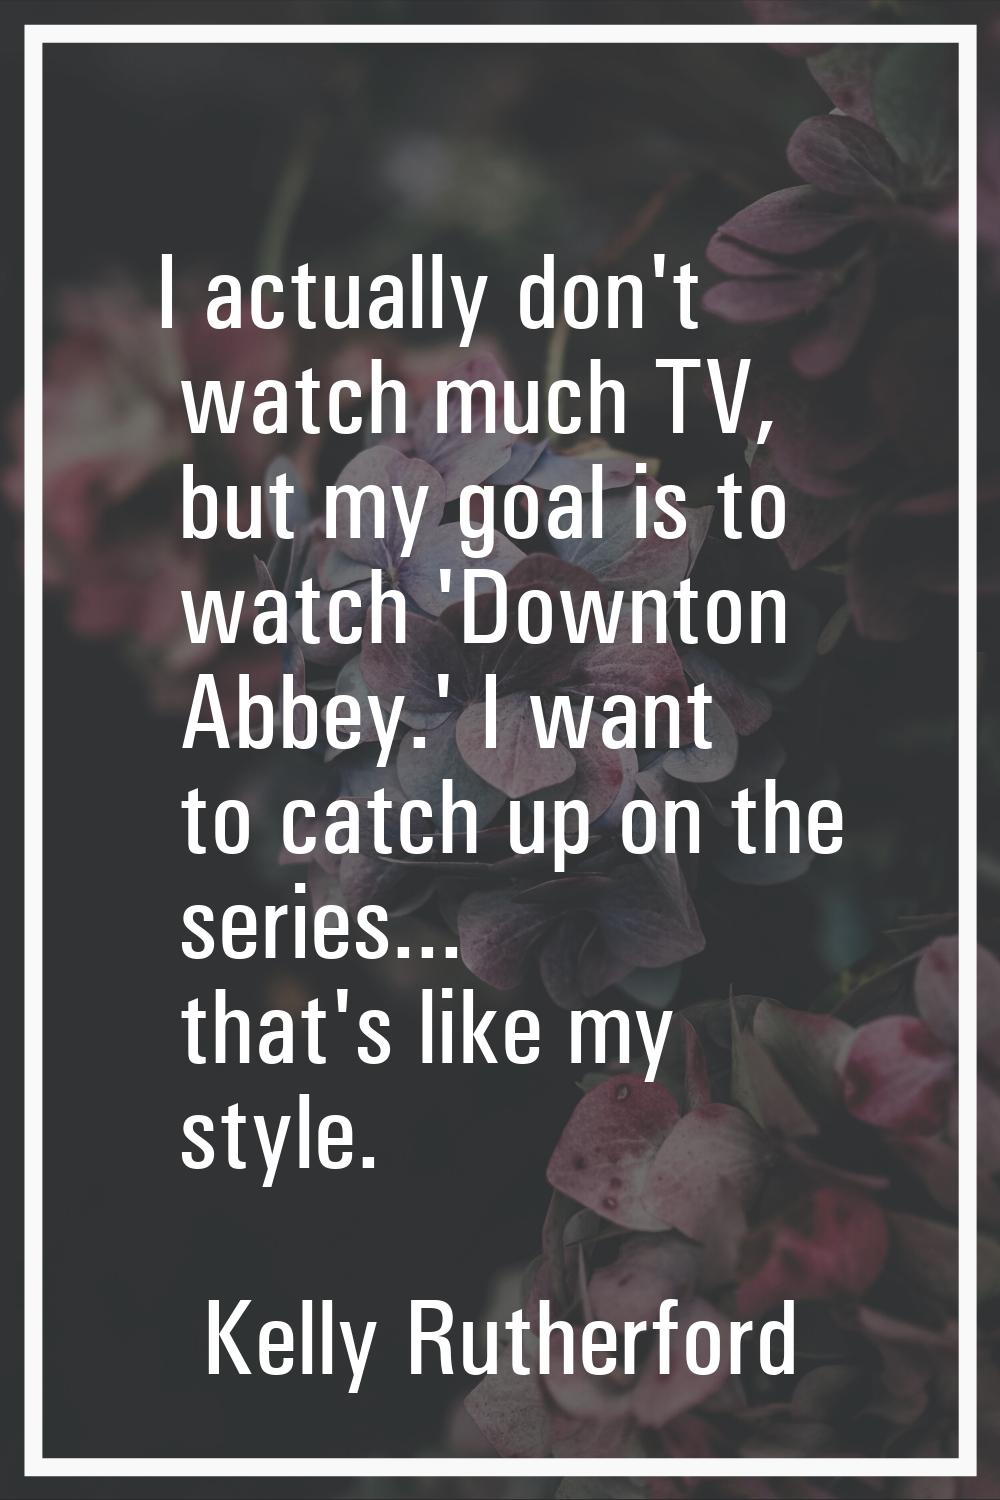 I actually don't watch much TV, but my goal is to watch 'Downton Abbey.' I want to catch up on the 